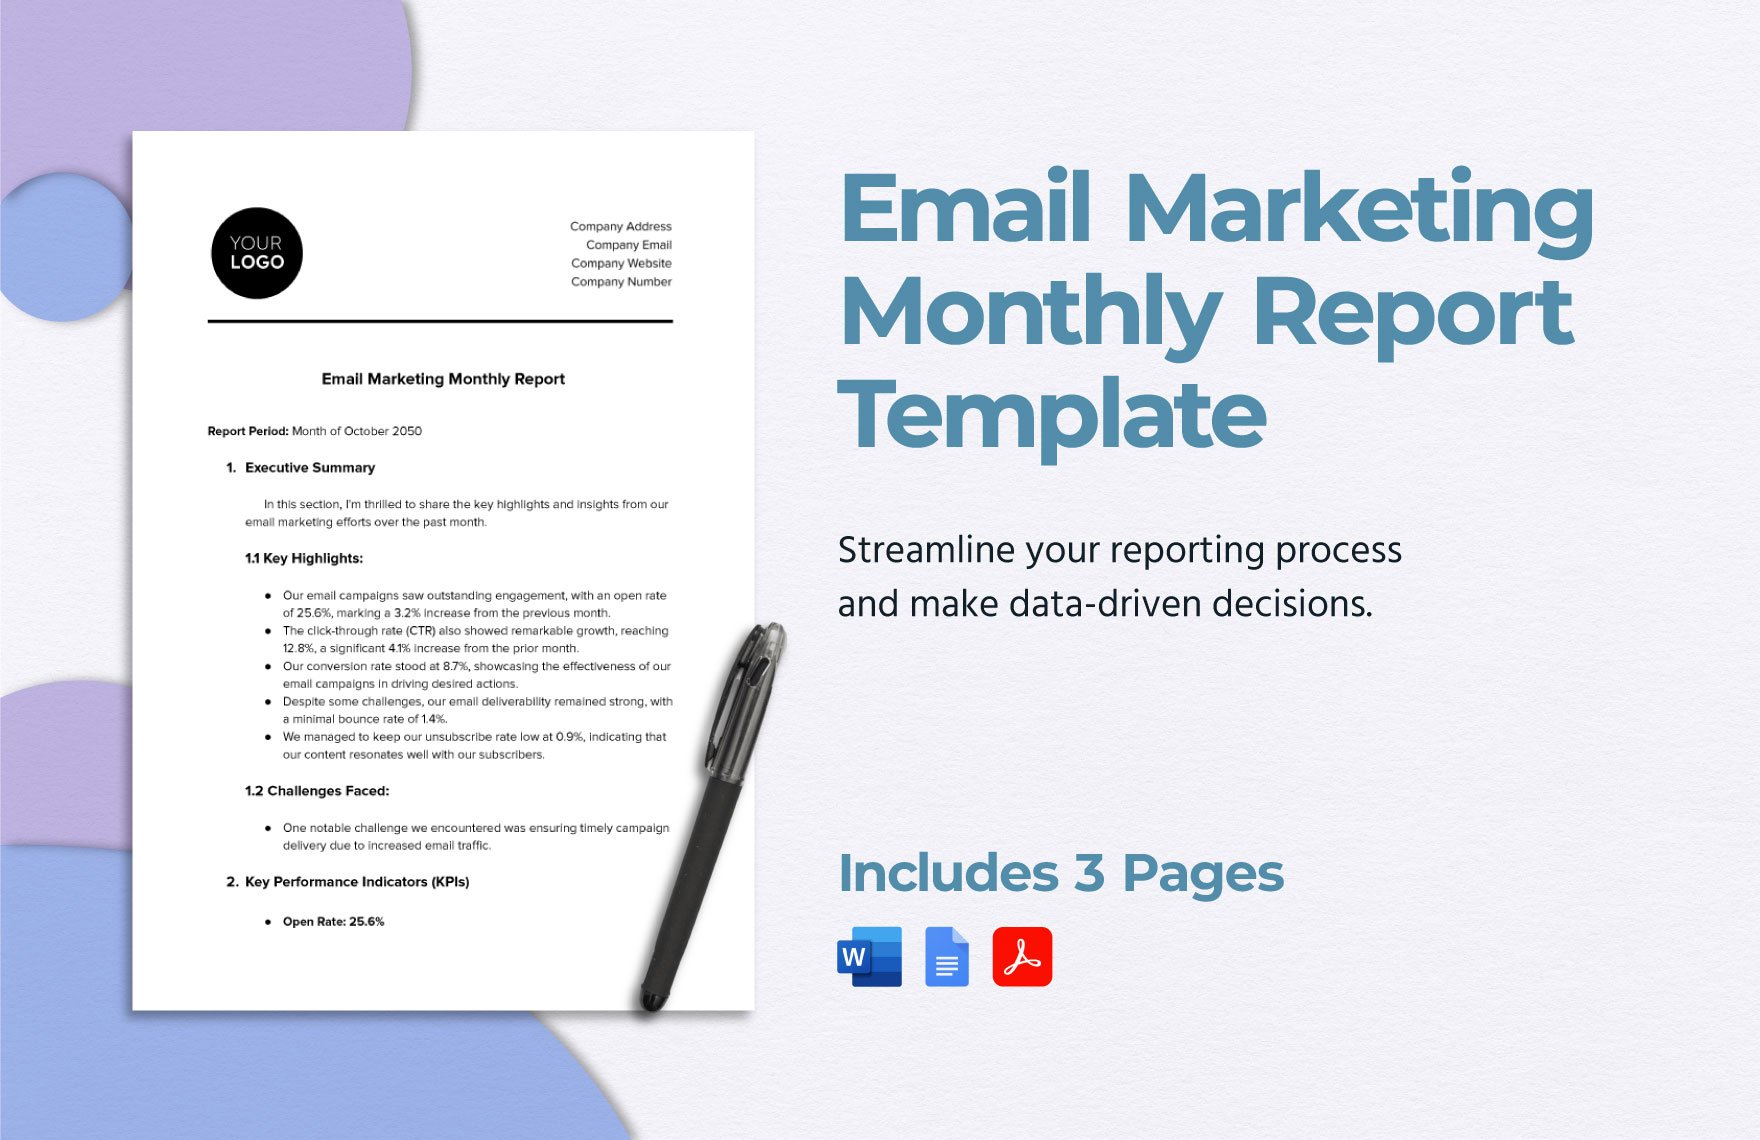 Email Marketing Monthly Report Template in Word, Google Docs, PDF